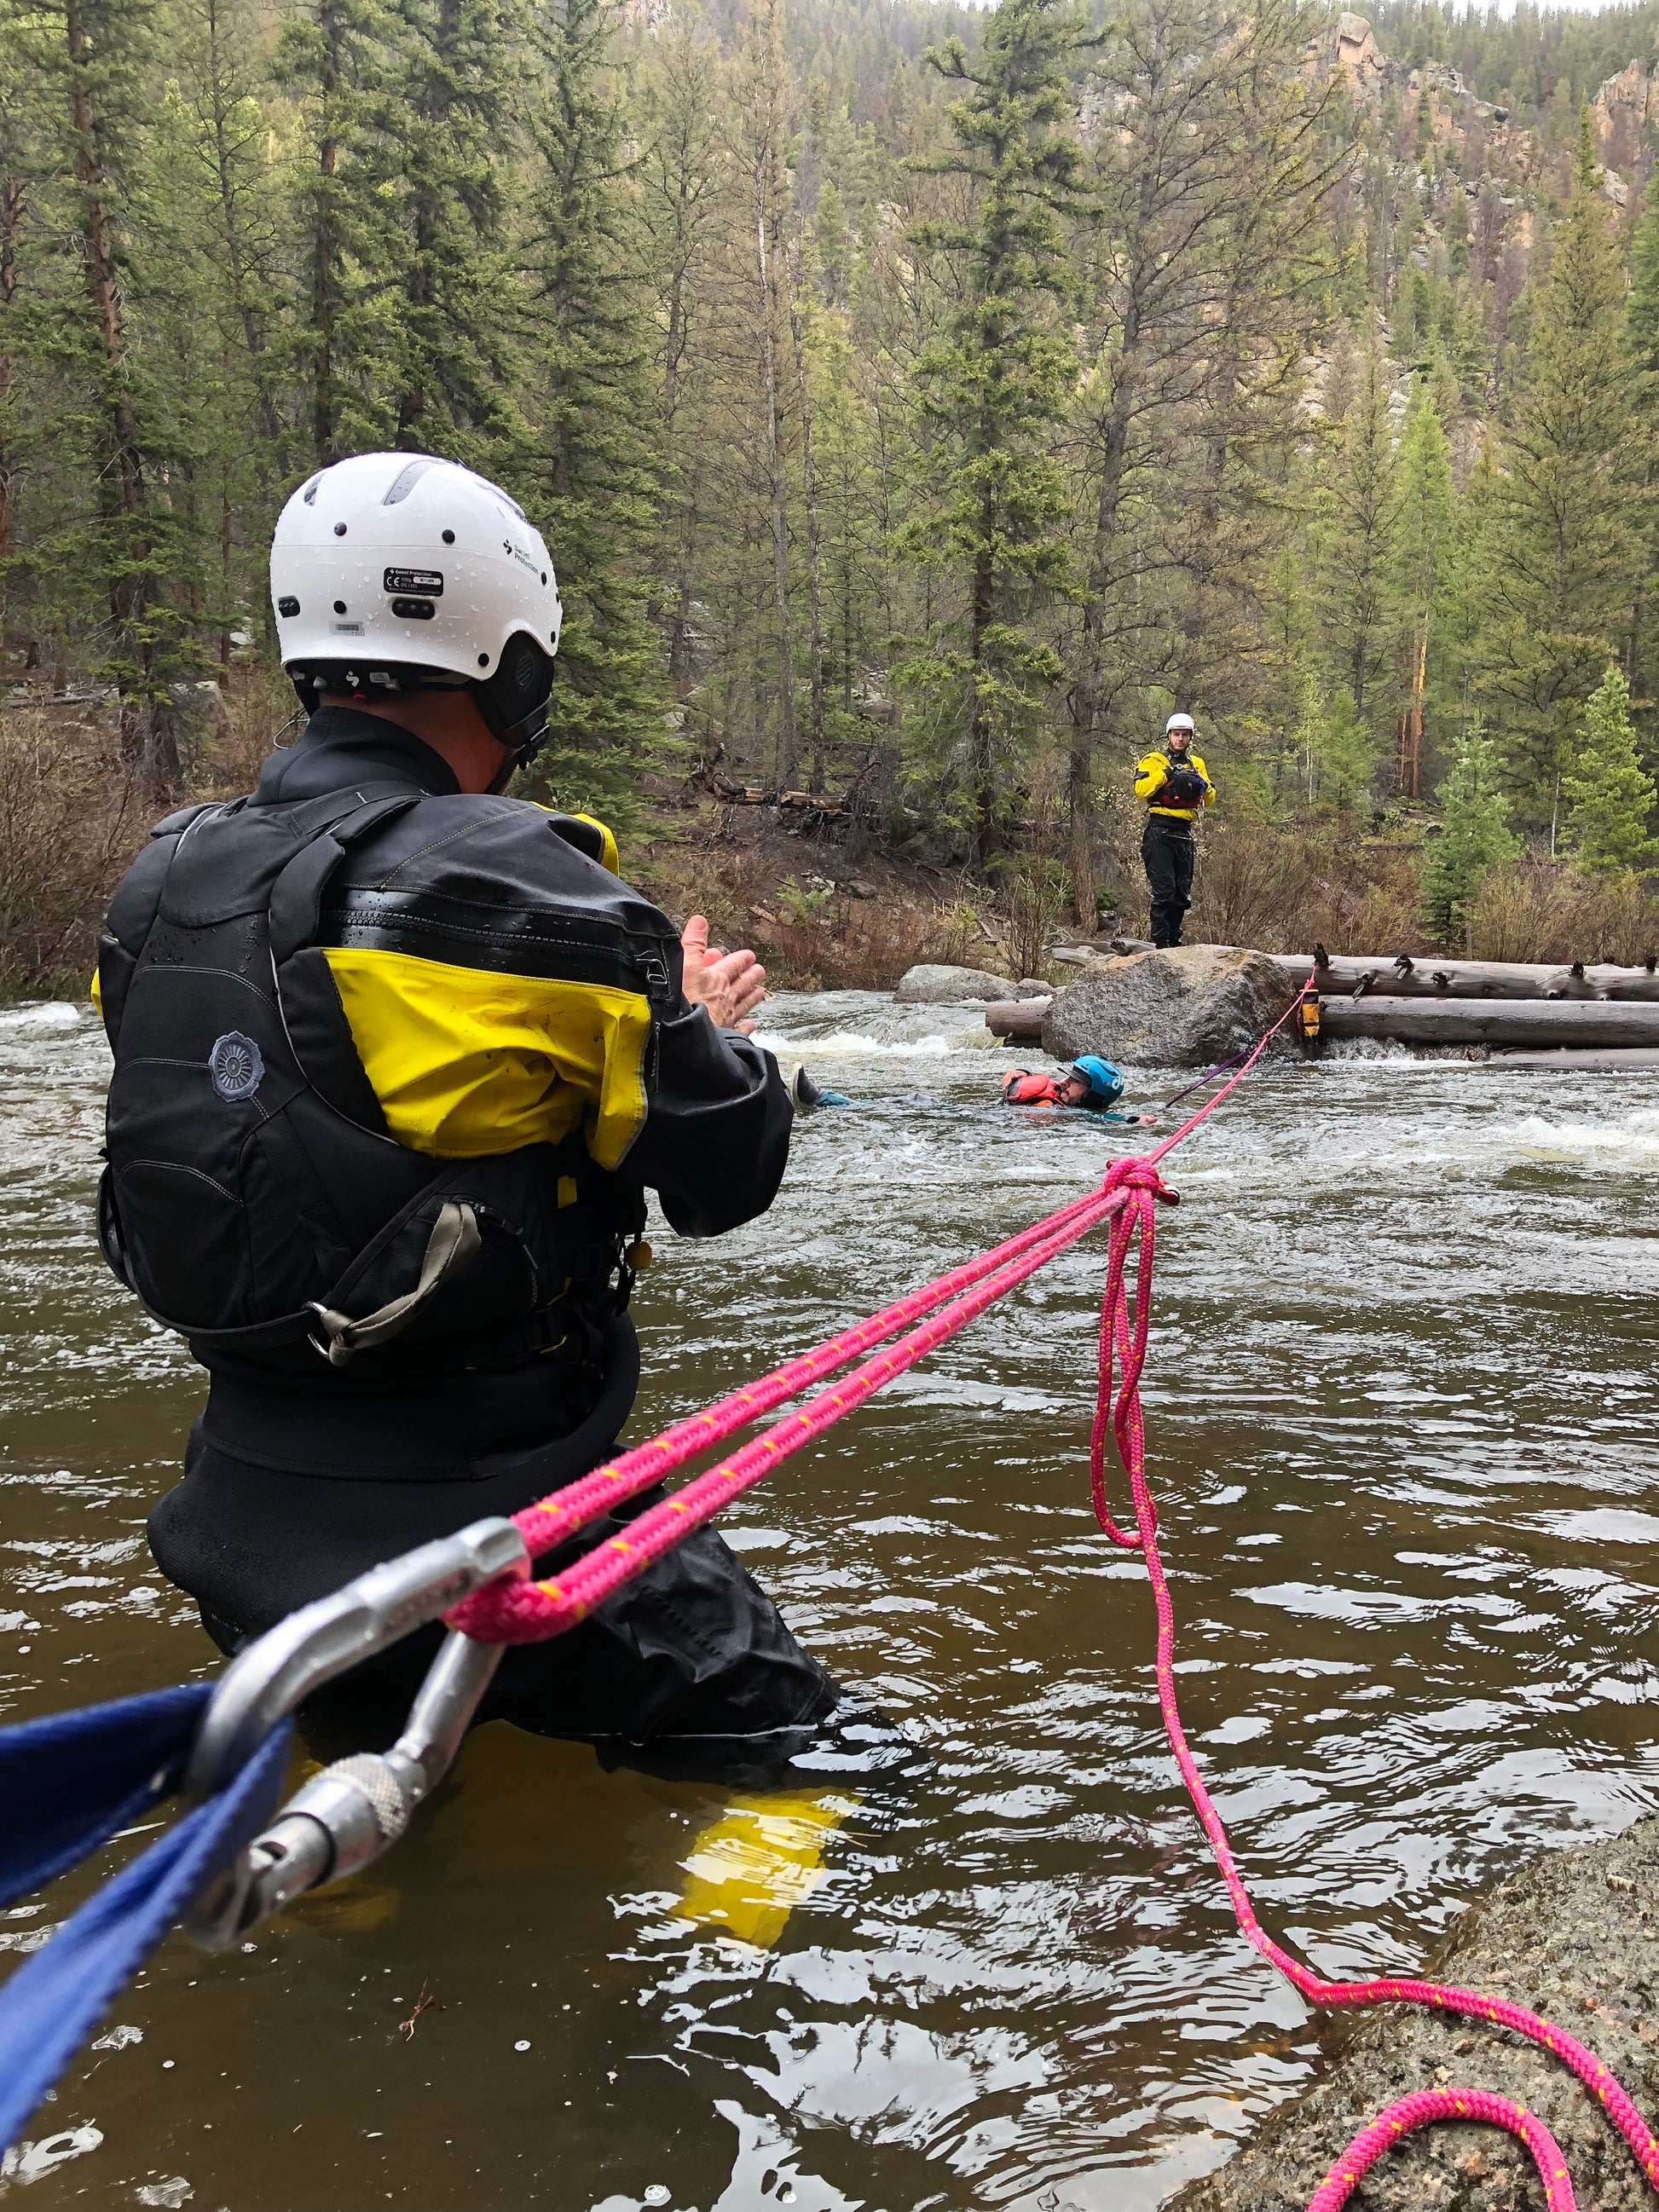 A group of 4CRS Paddle School instructors exhibiting excellent technical knowledge while teaching skills on a rope in a river during the Swiftwater Rescue ACA Instructor Course.